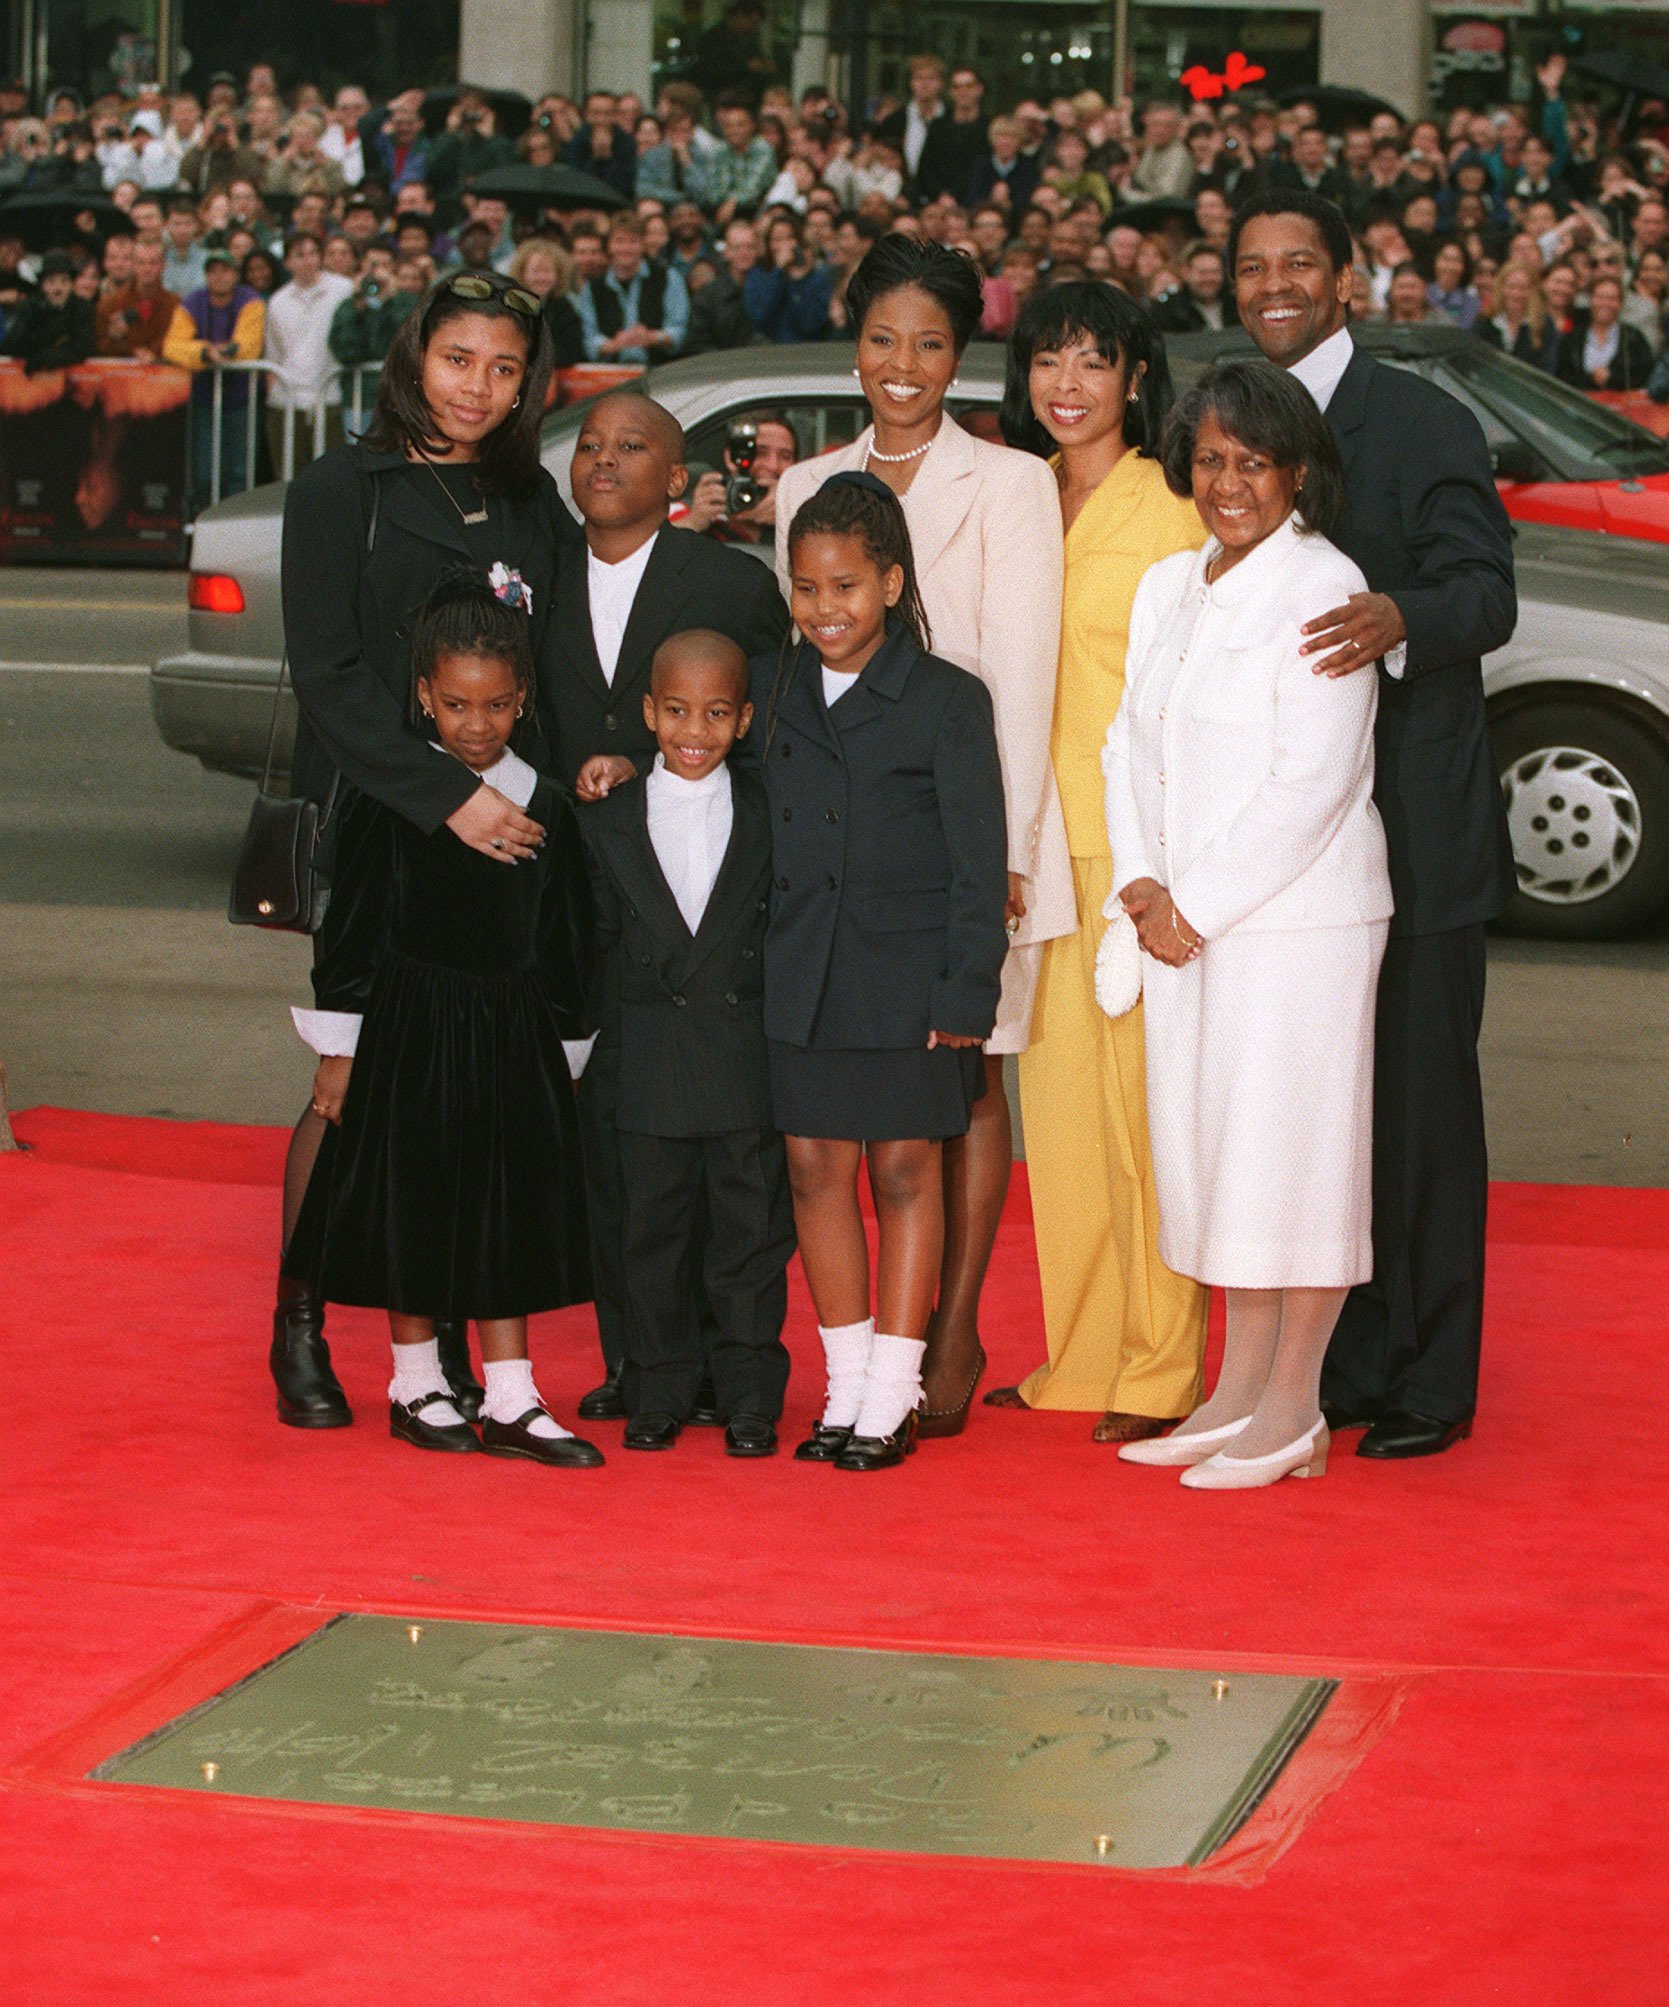 Actor Denzel Washington and his wife, actress Pauletta Washington, pictured with their children and relatives at the Washington's Footprint Ceremony on January 16, 1998 ┃Source: Getty Images